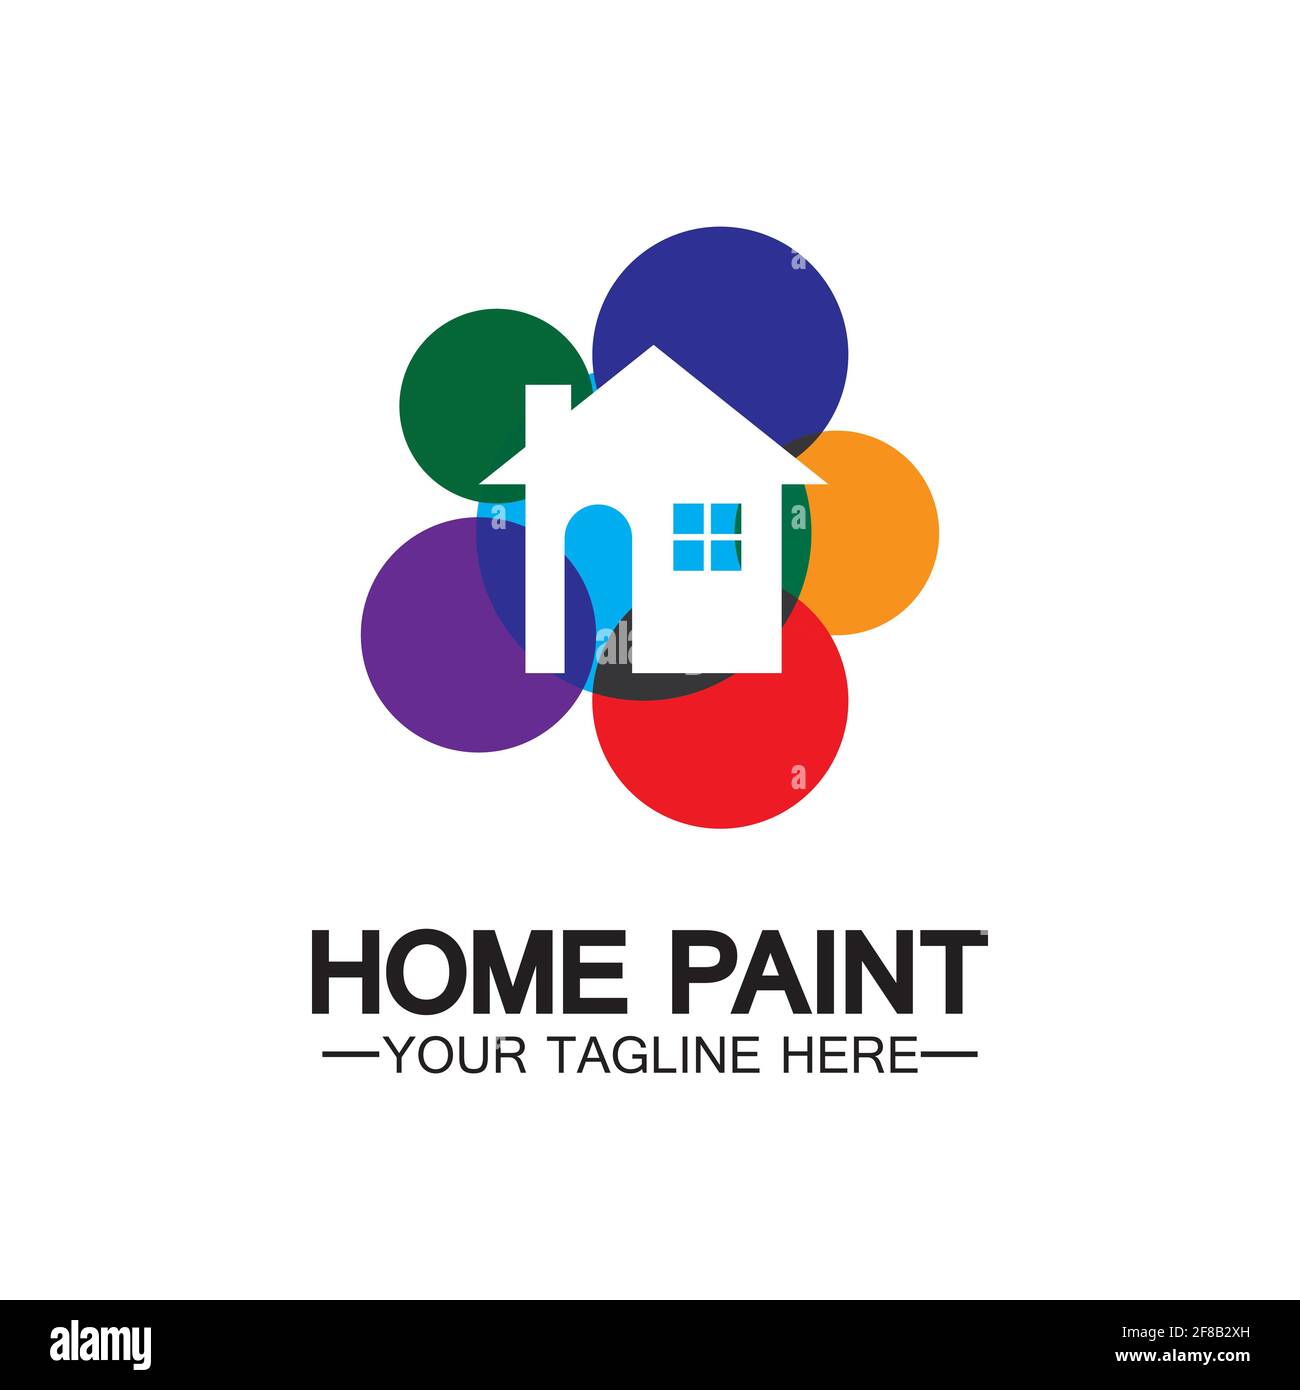 Home Painting Vector Logo Design.Home House Painting Service ...